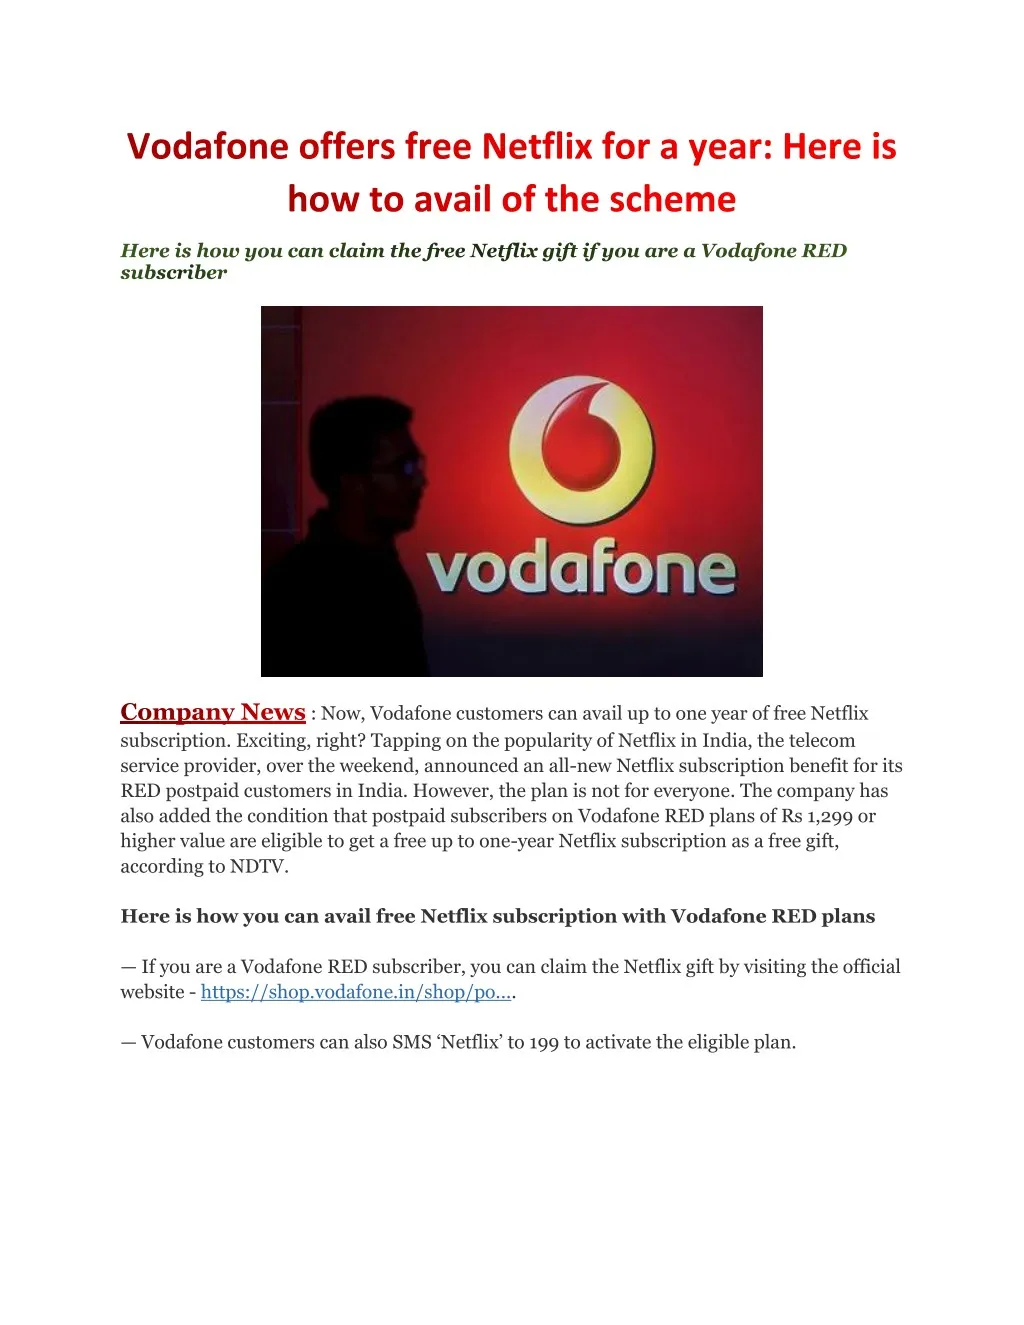 now vodafone customers can avail up to one year